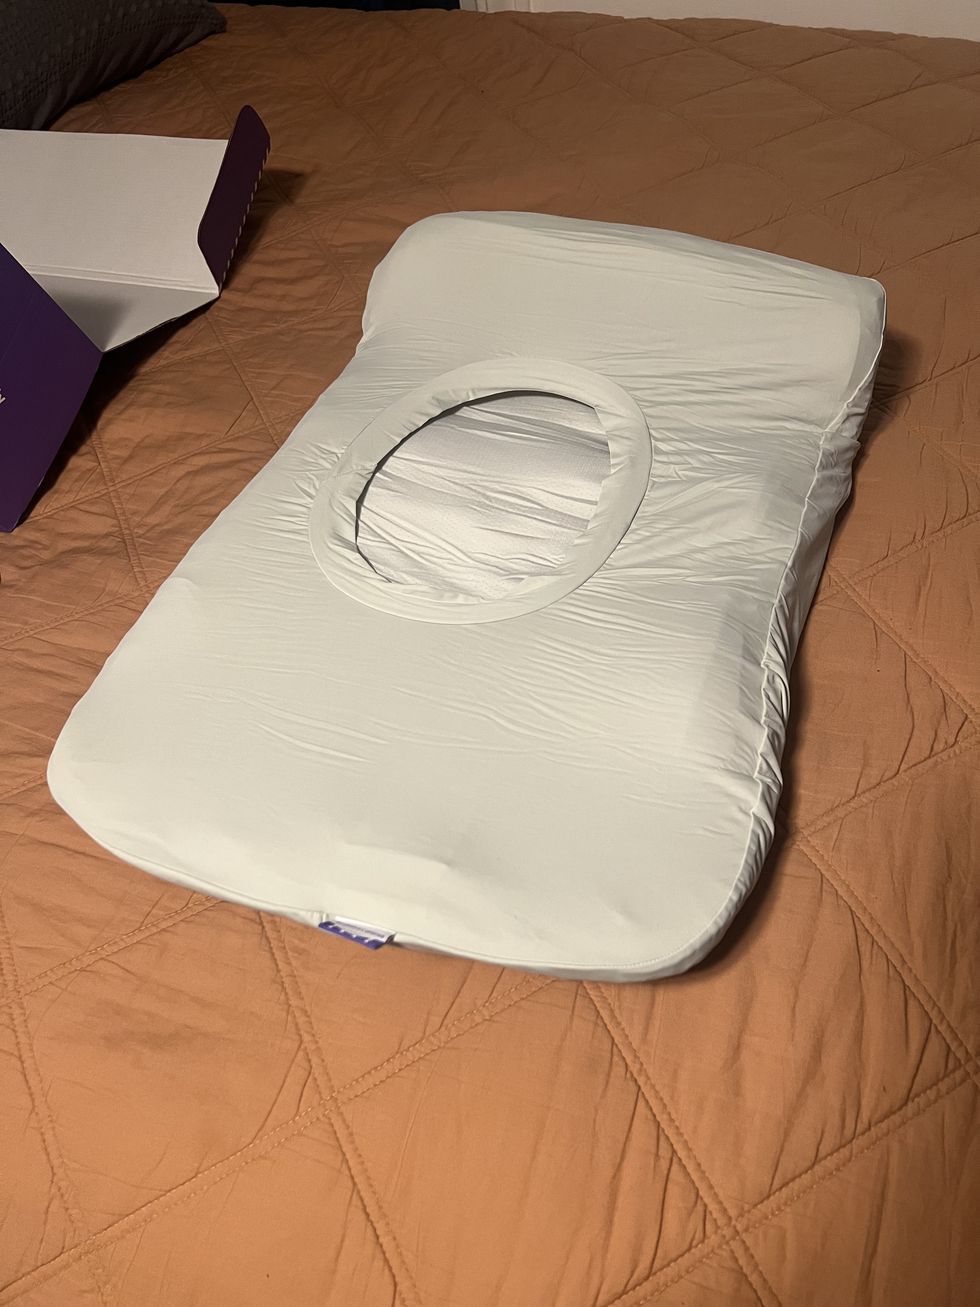 a rolled up pillow